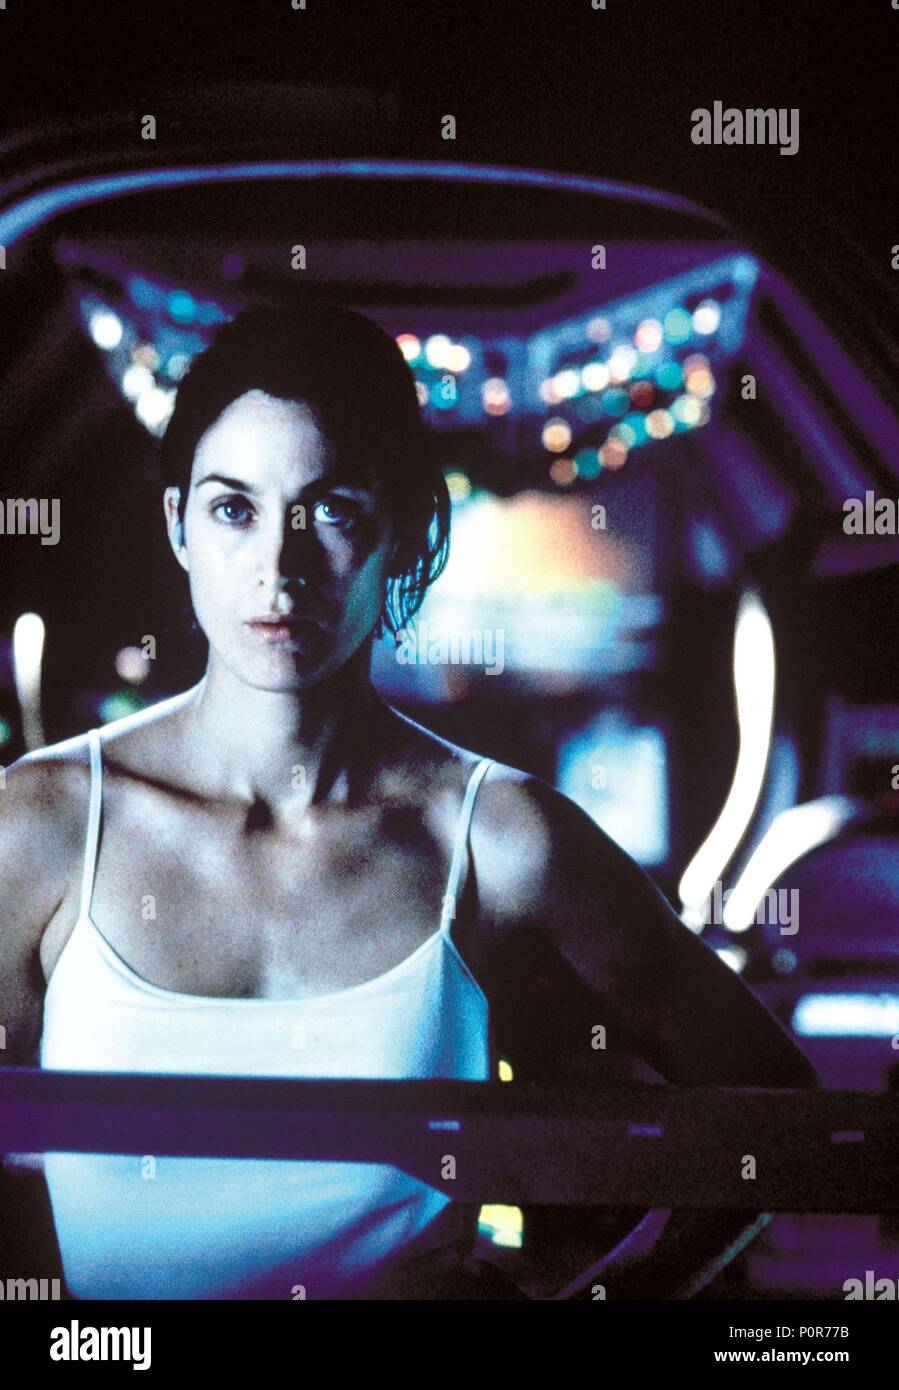 Original Film Title: RED PLANET.  English Title: RED PLANET.  Film Director: ANTHONY HOFFMAN.  Year: 2000.  Stars: CARRIE-ANNE MOSS. Credit: WARNER BROS. PICTURES / Album Stock Photo